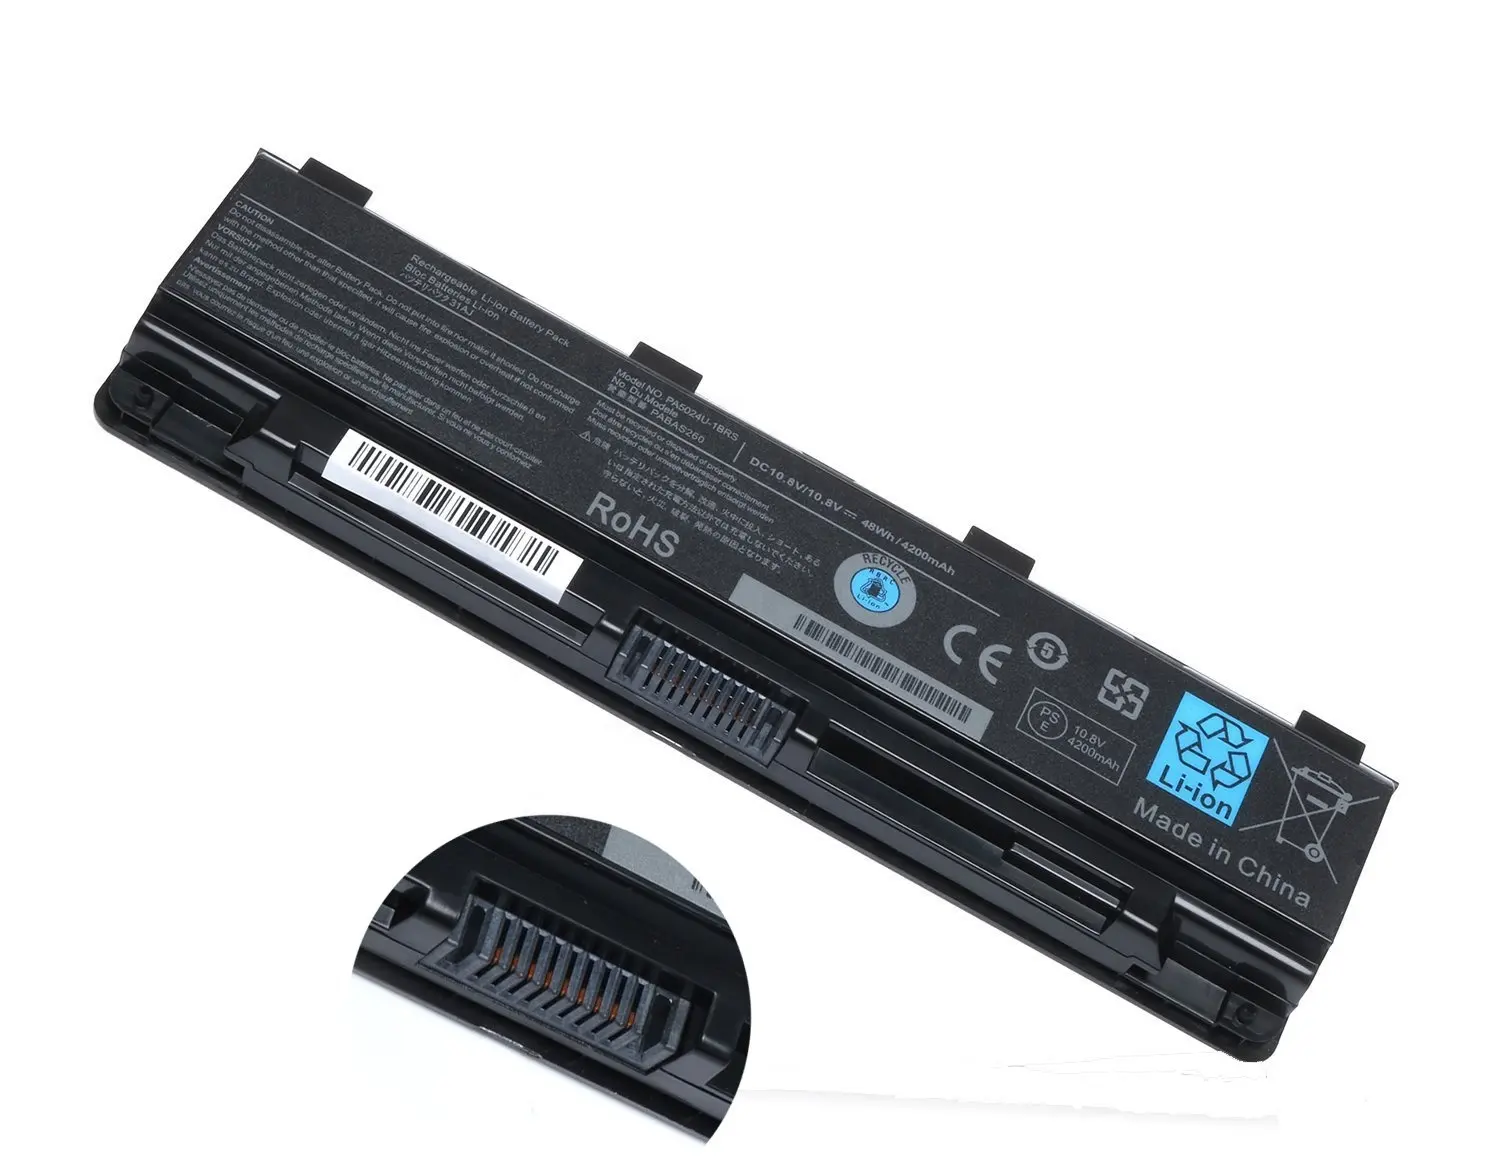 Compatible 10.8V 48wh PA5024U-1BRS laptop battery for Toshiba Satellite C850 L805 S850 PABAS260 Notebook battery